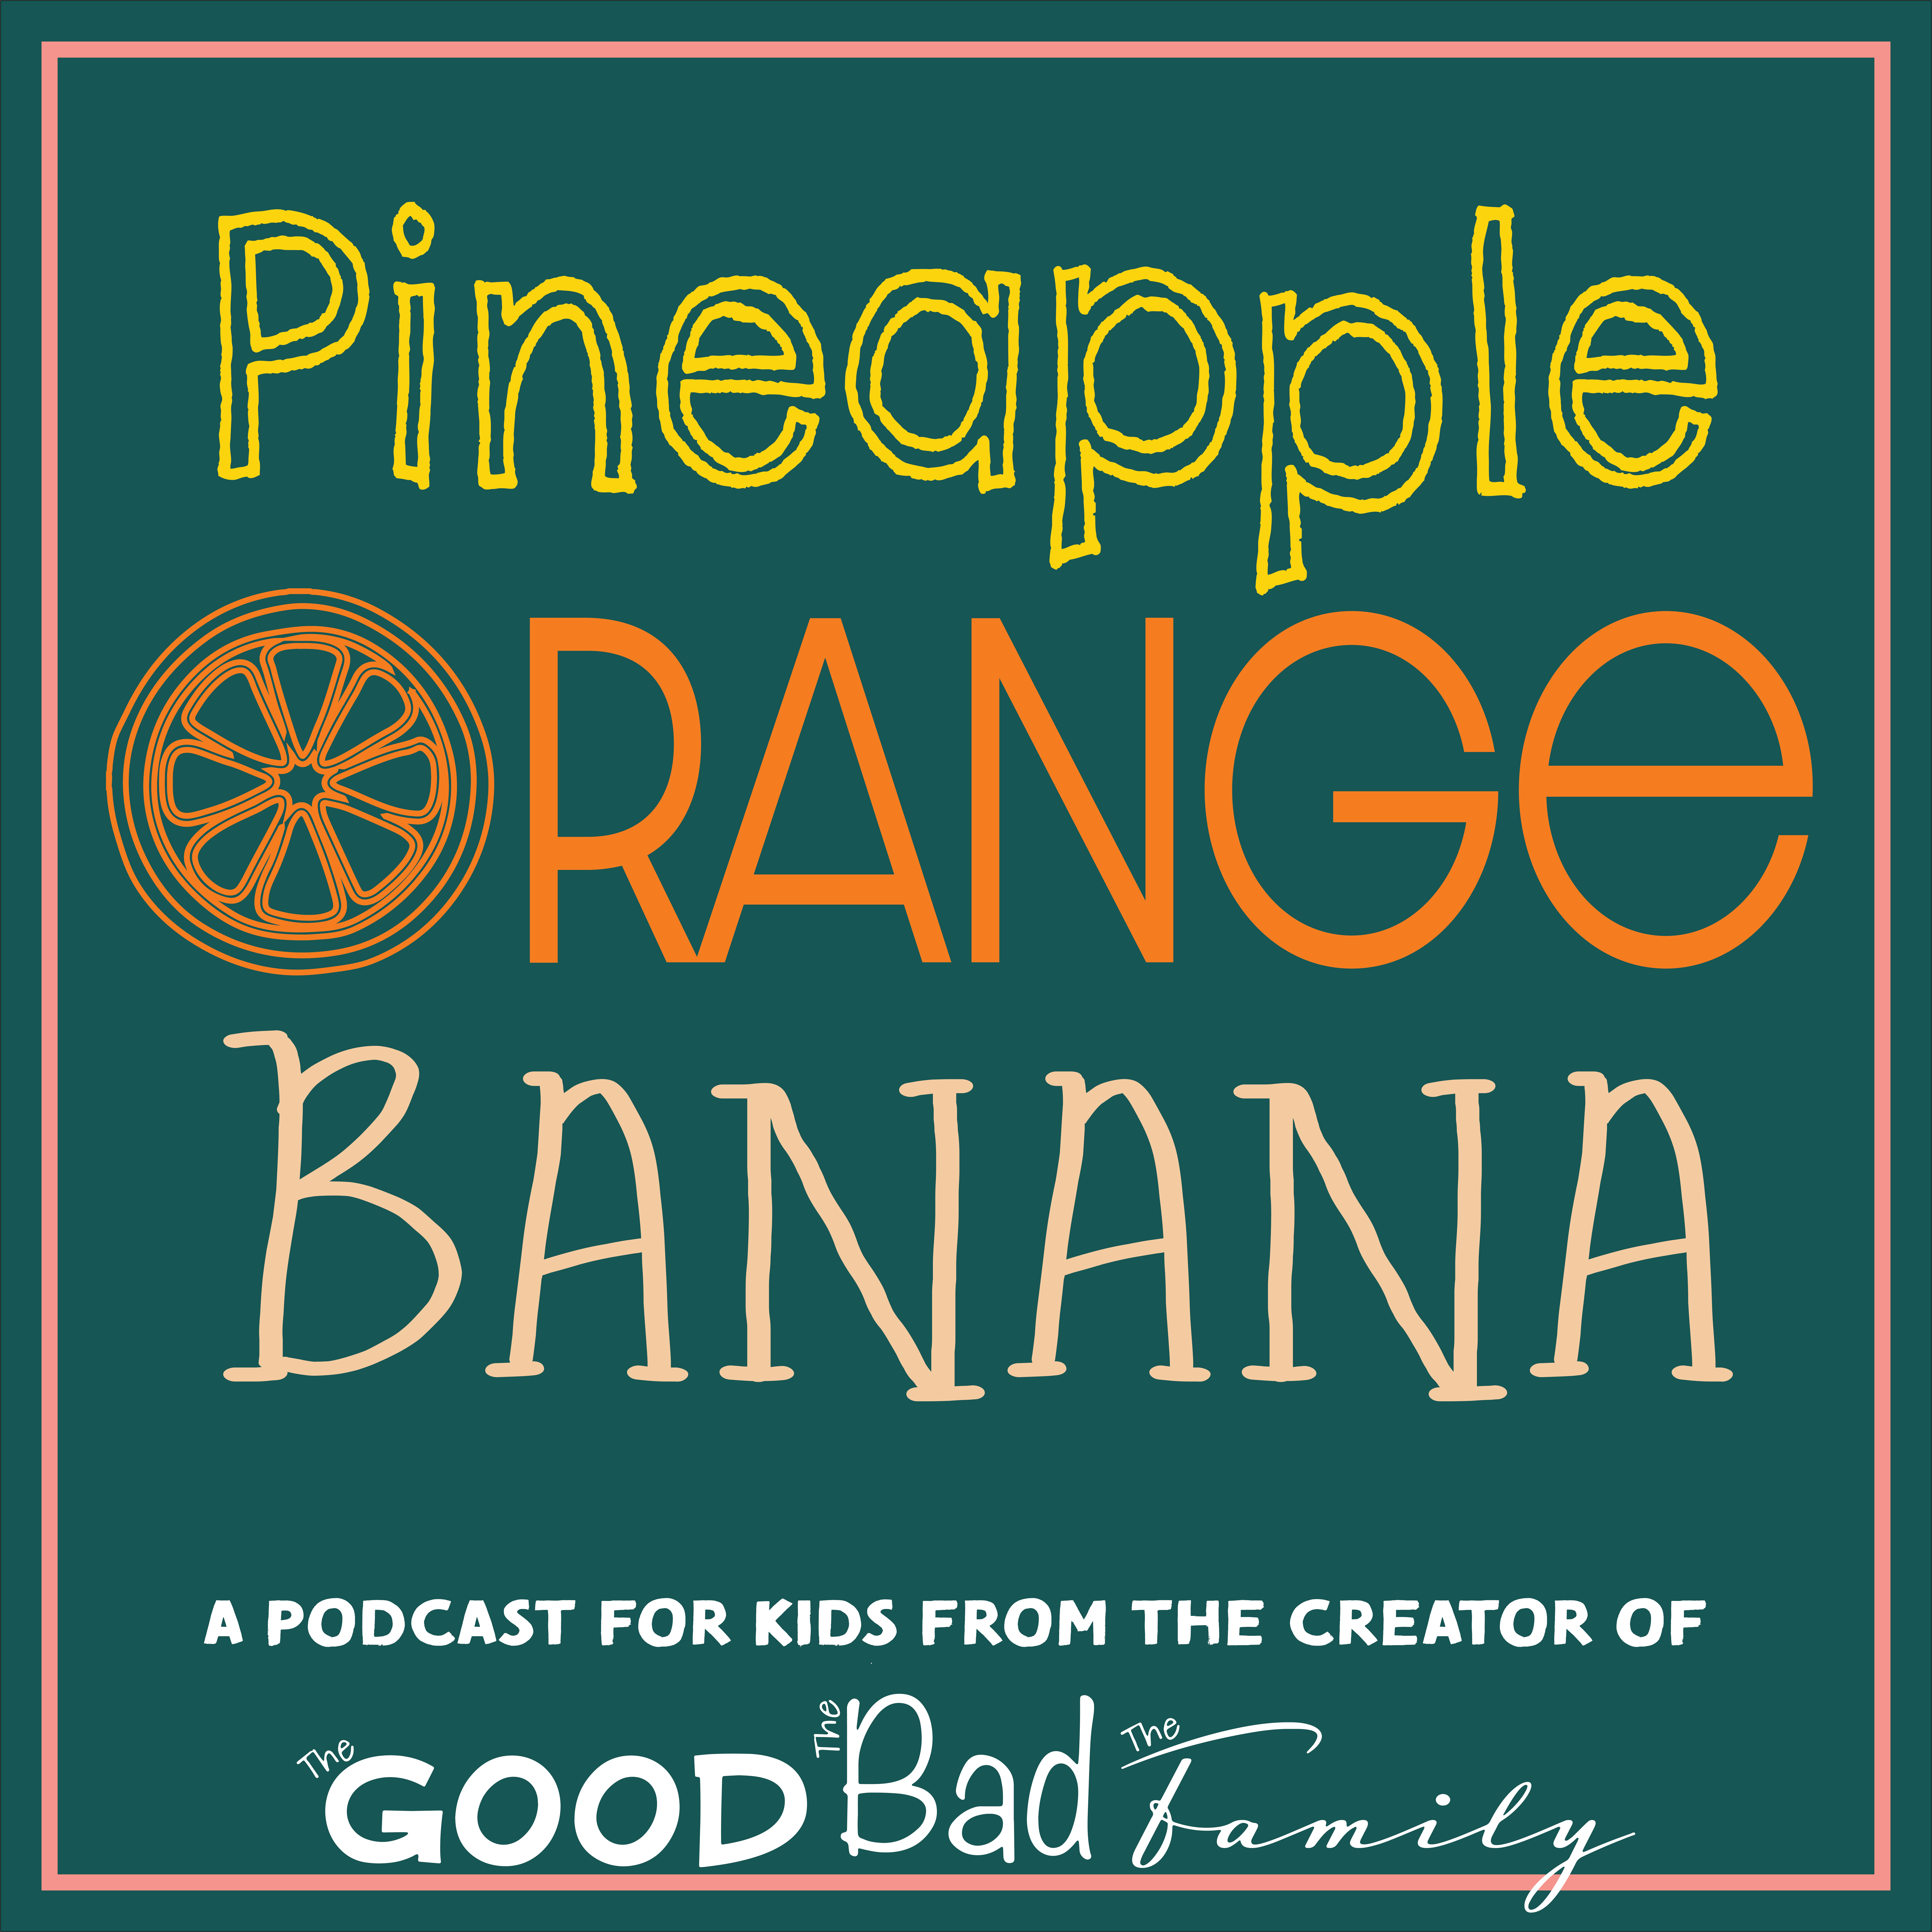 My Podcast for Kids